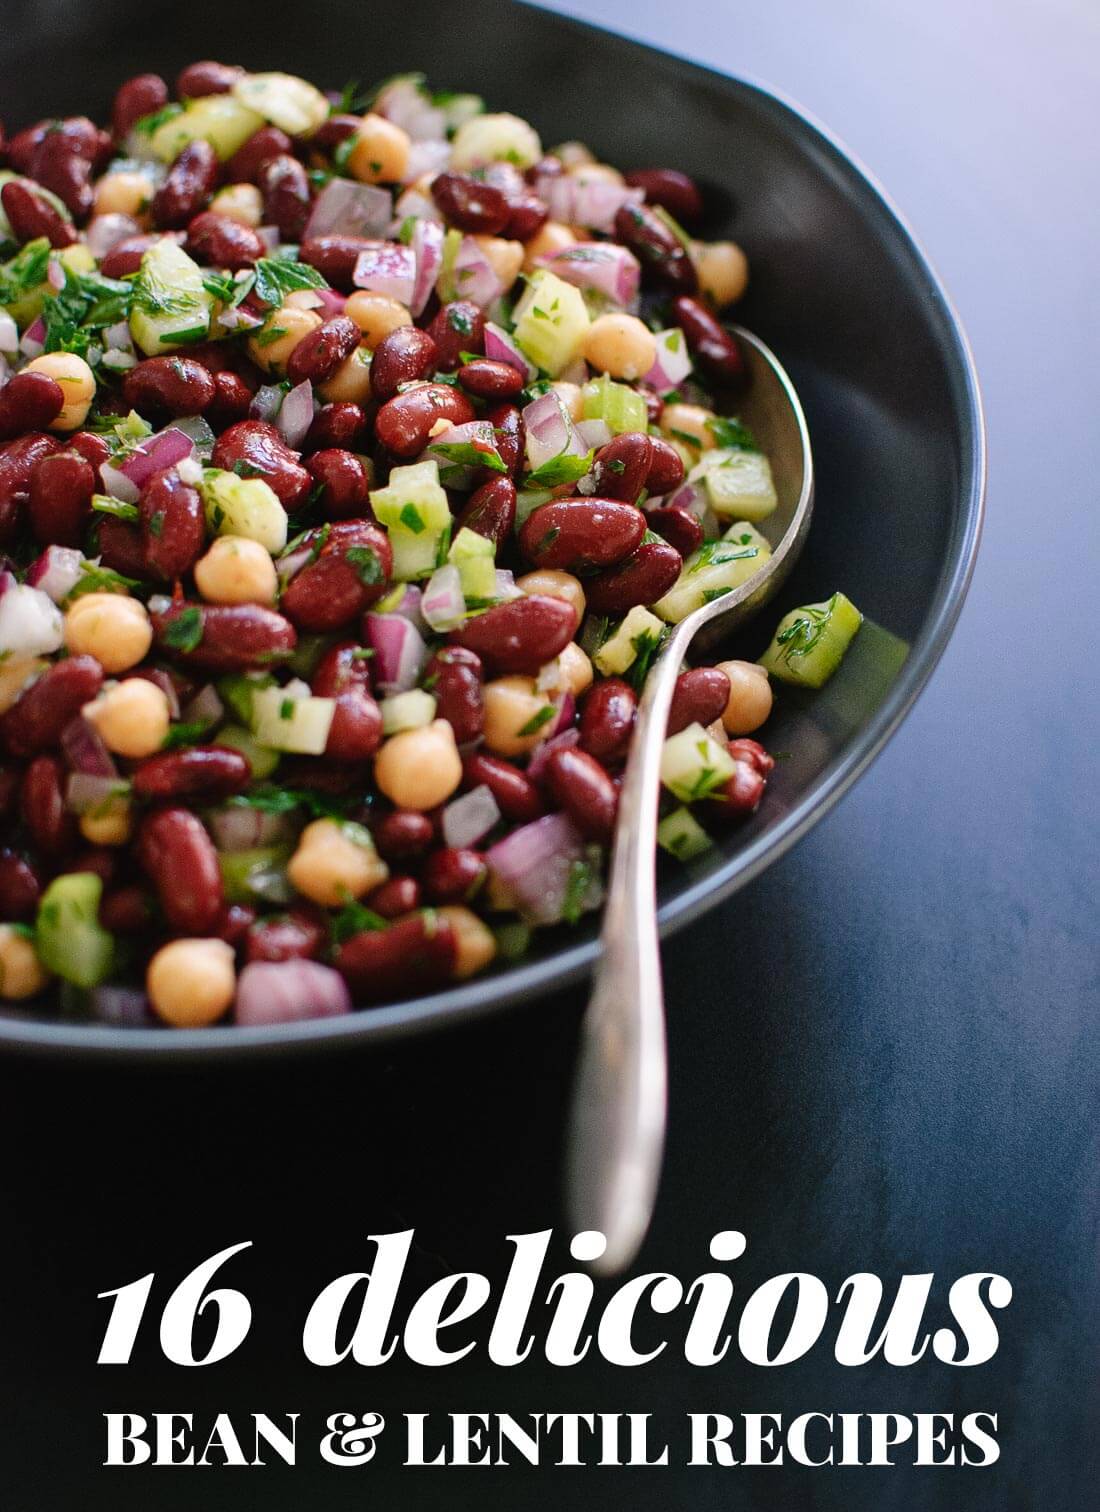 Find 16 amazing recipes made with black beans, chickpeas, lentils and more! All of these recipes are vegetarian but rich in protein thanks to the beans. cookieandkate.com